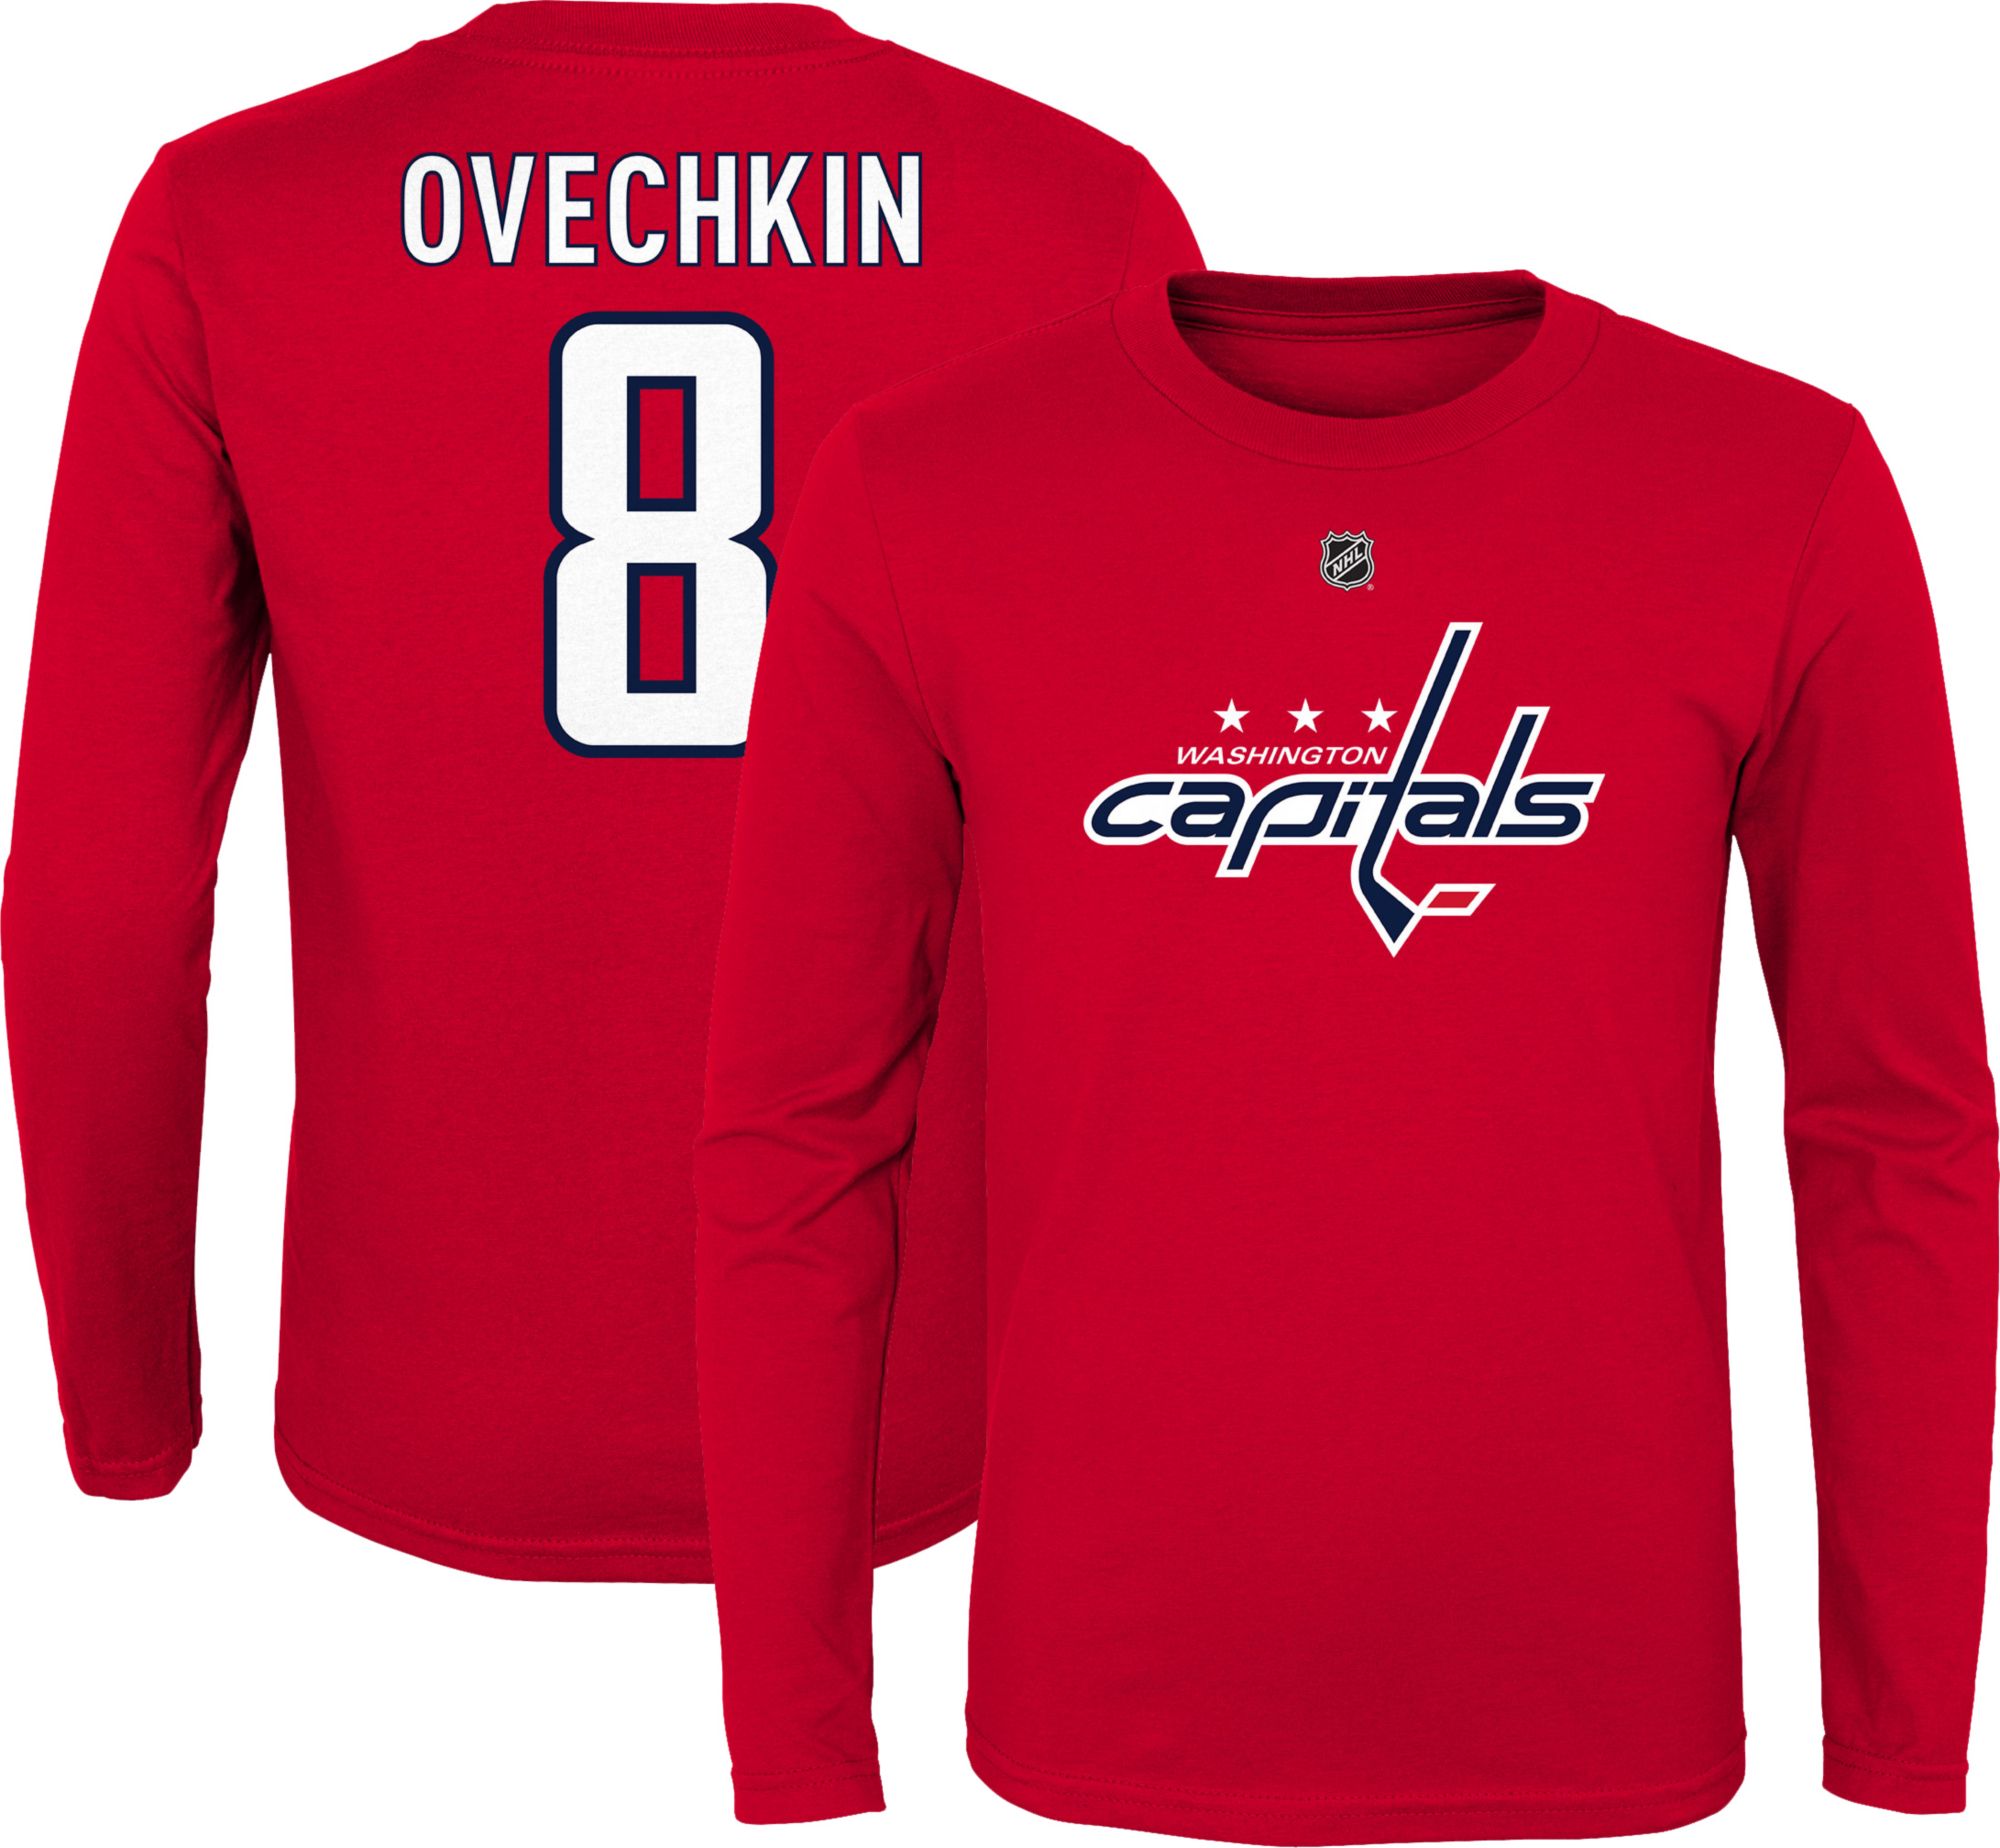 youth ovechkin jersey